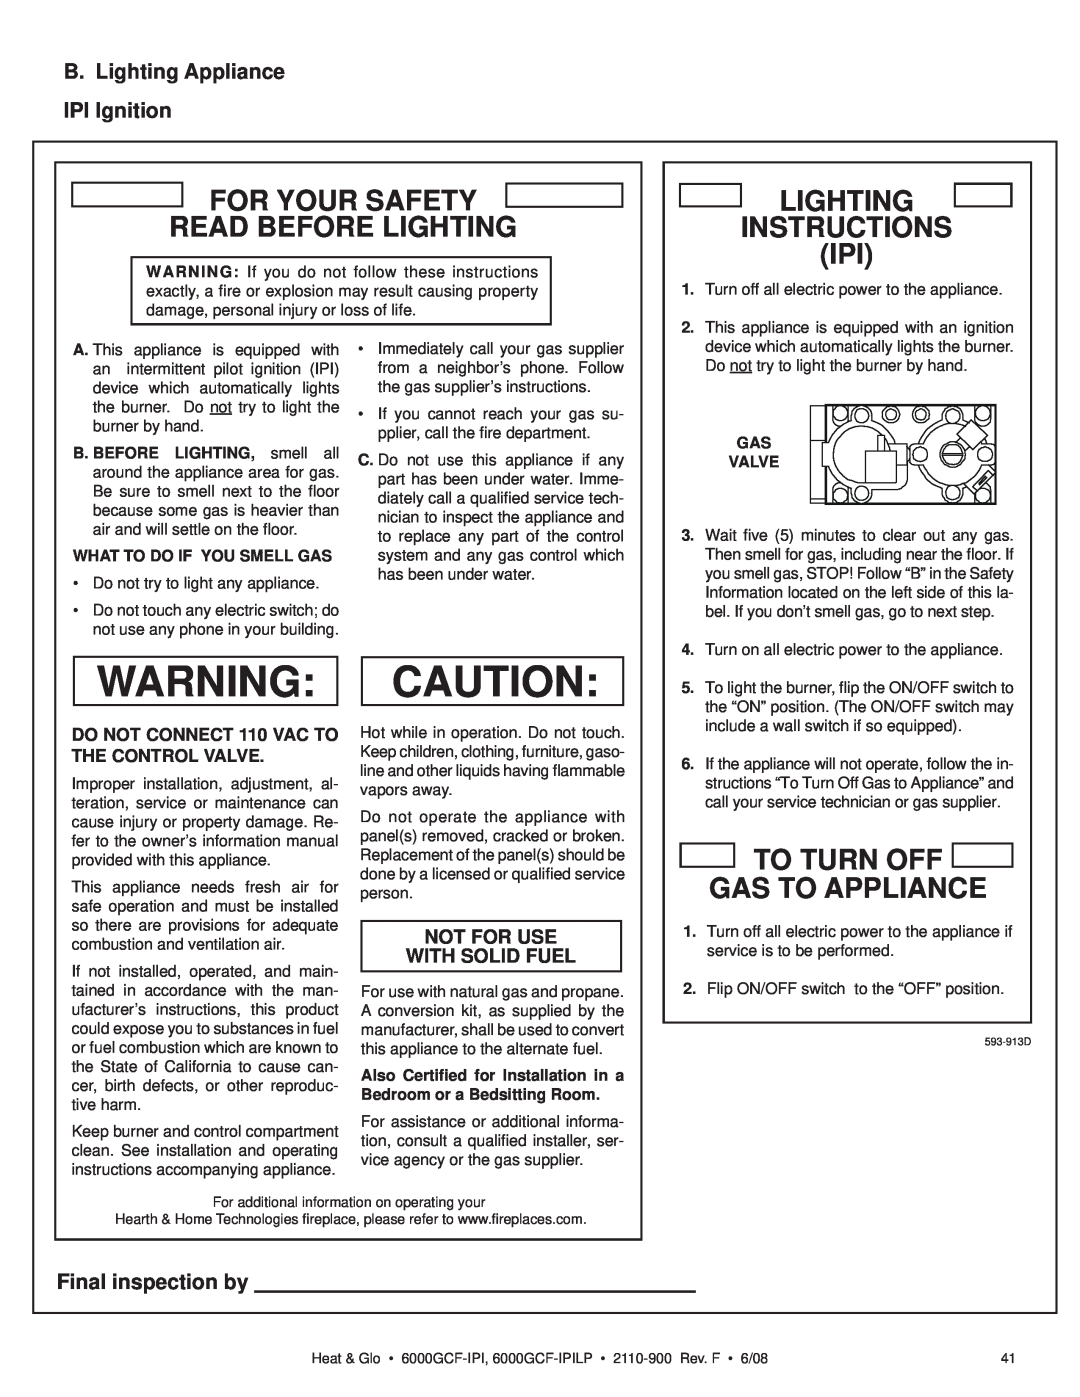 Heat & Glo LifeStyle 6000GCF-IPI For Your Safety Read Before Lighting, Lighting Instructions Ipi, Final inspection by 